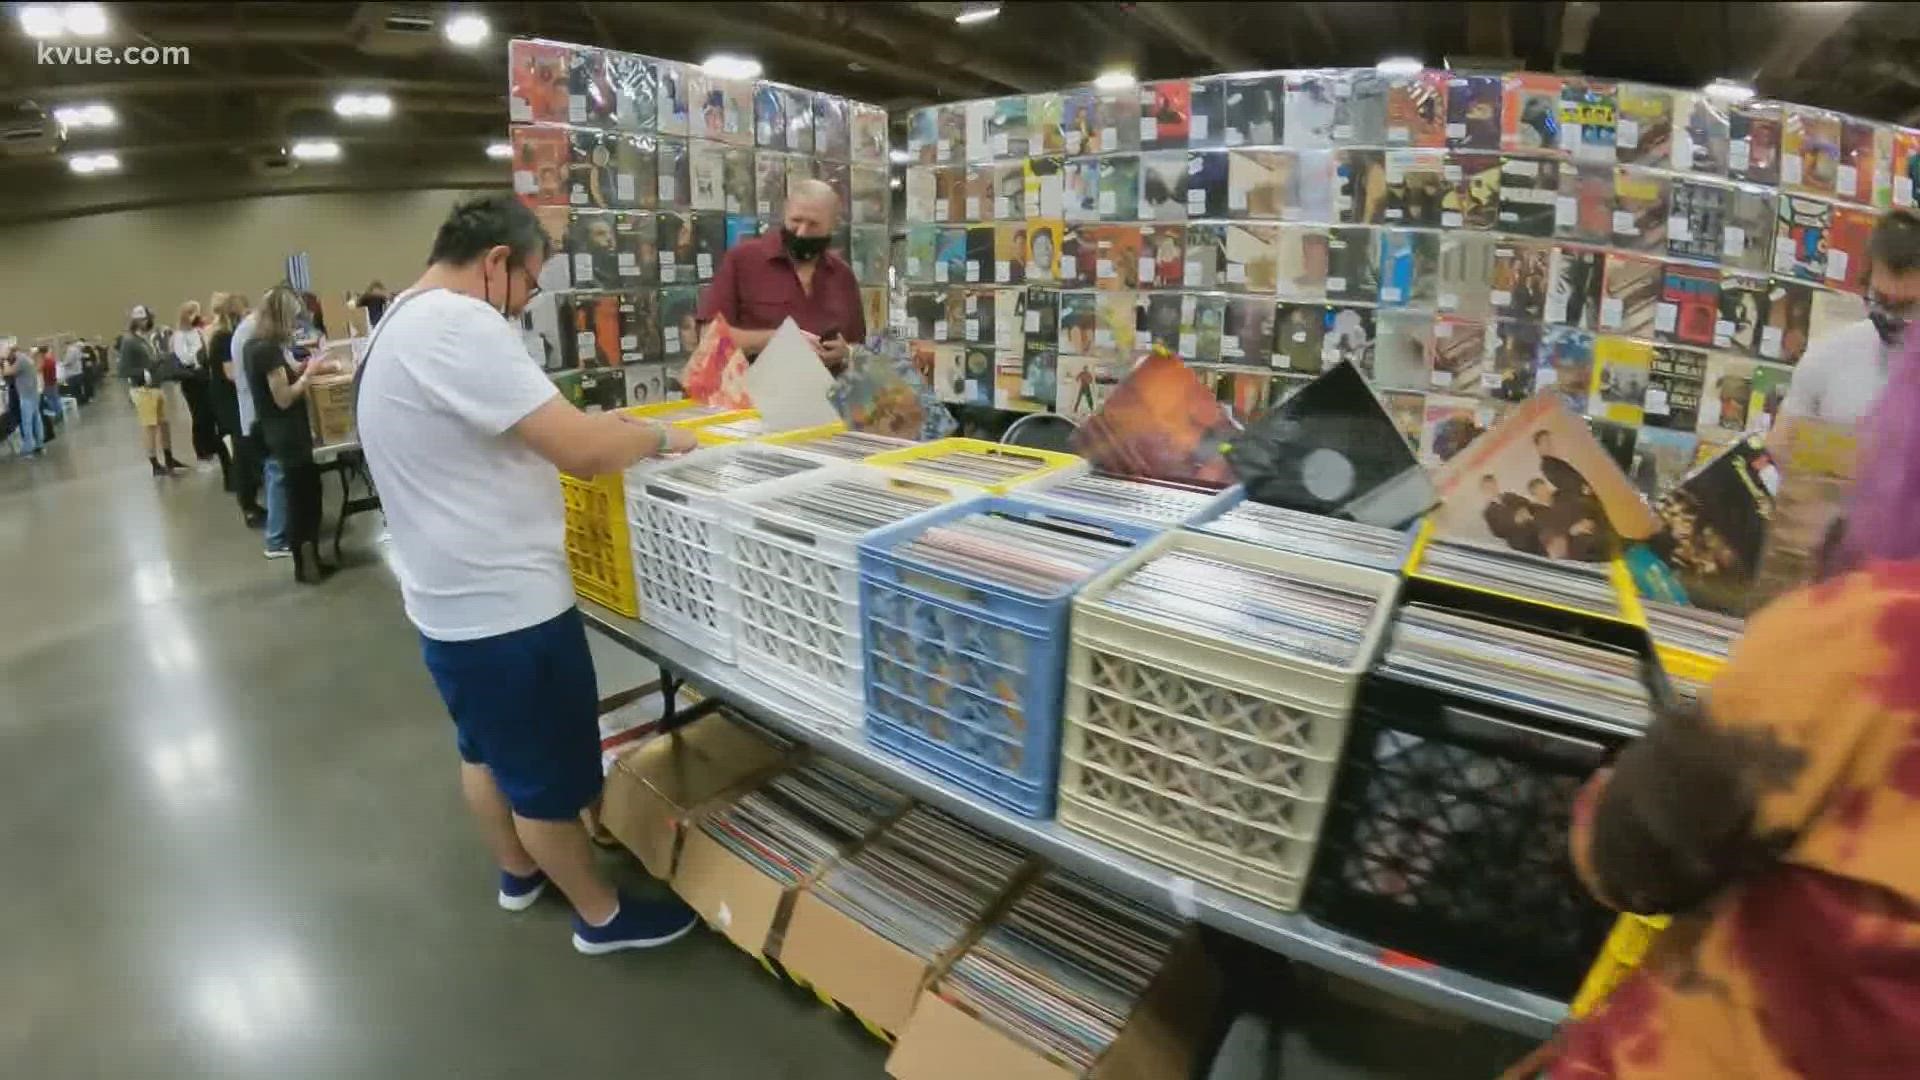 Record collectors and music lovers from all over the country are in Austin this weekend to hunt for vinyl.